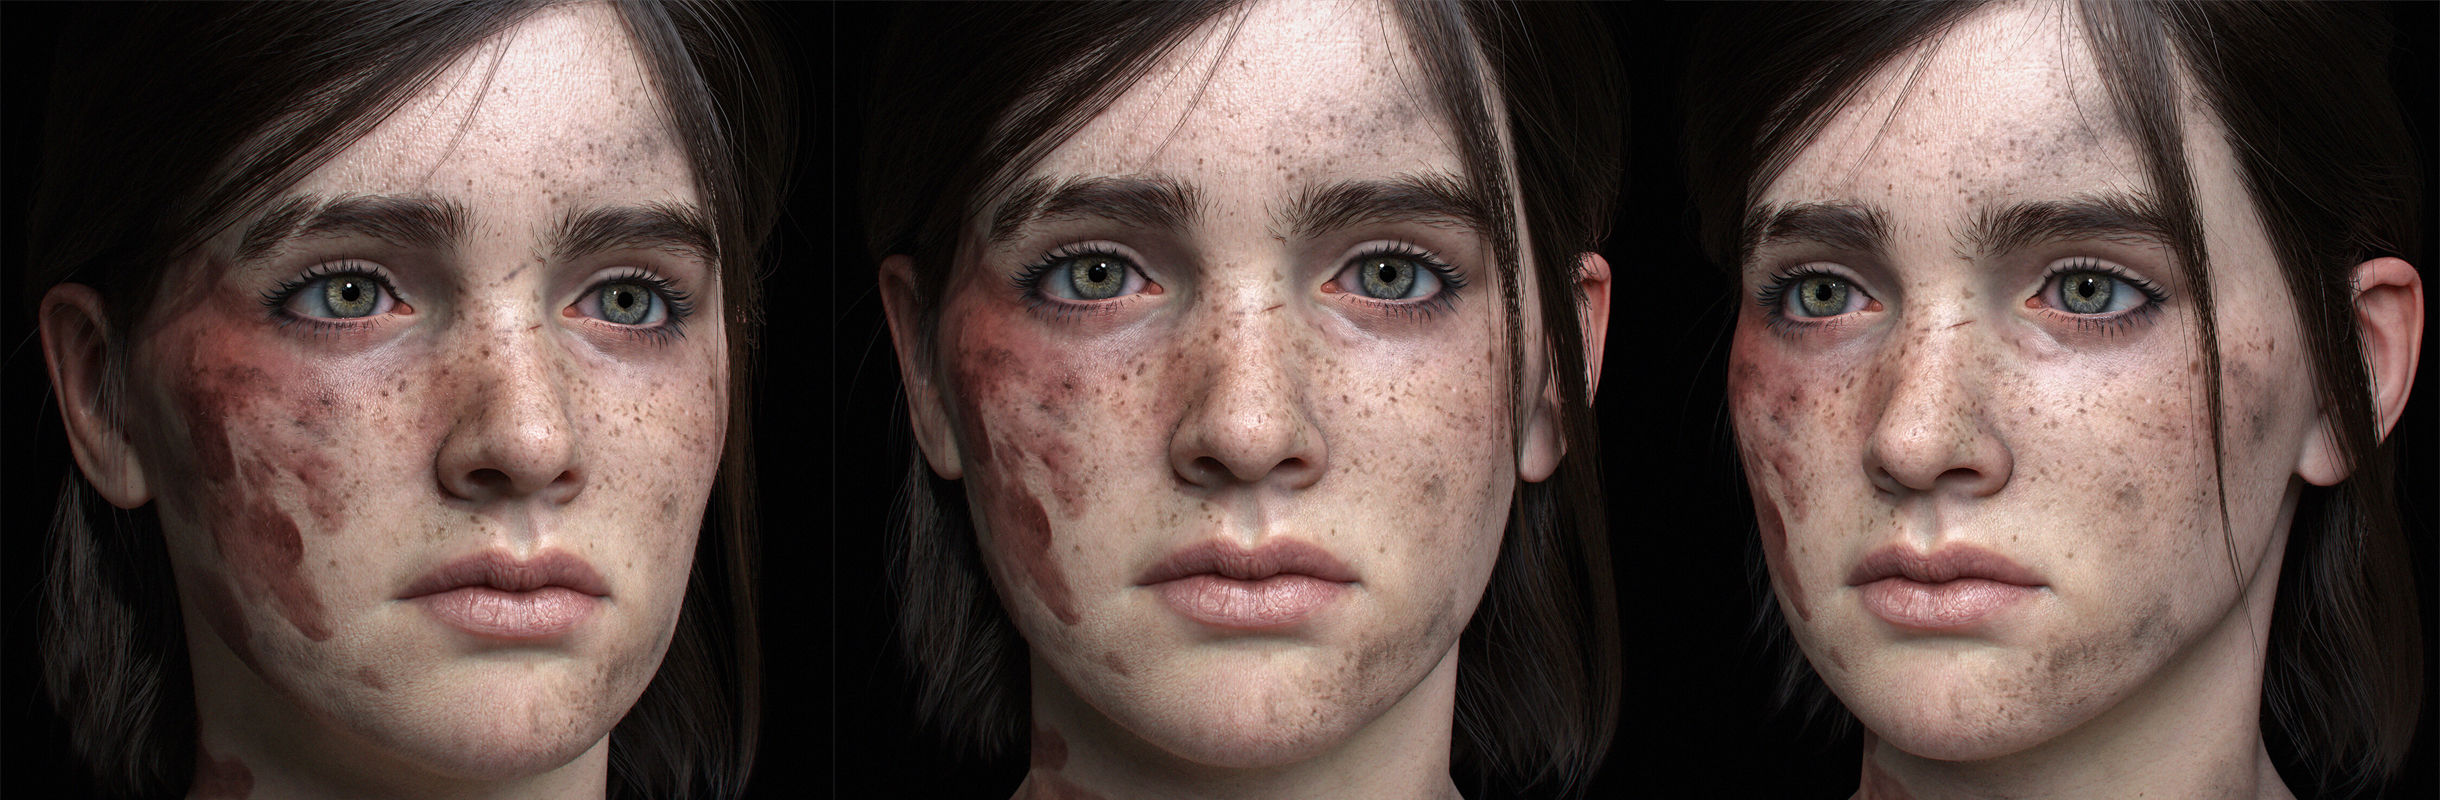 The Last Of Us' Fans Are Convinced Ellie Should Look Like This Painting in  'Part 3